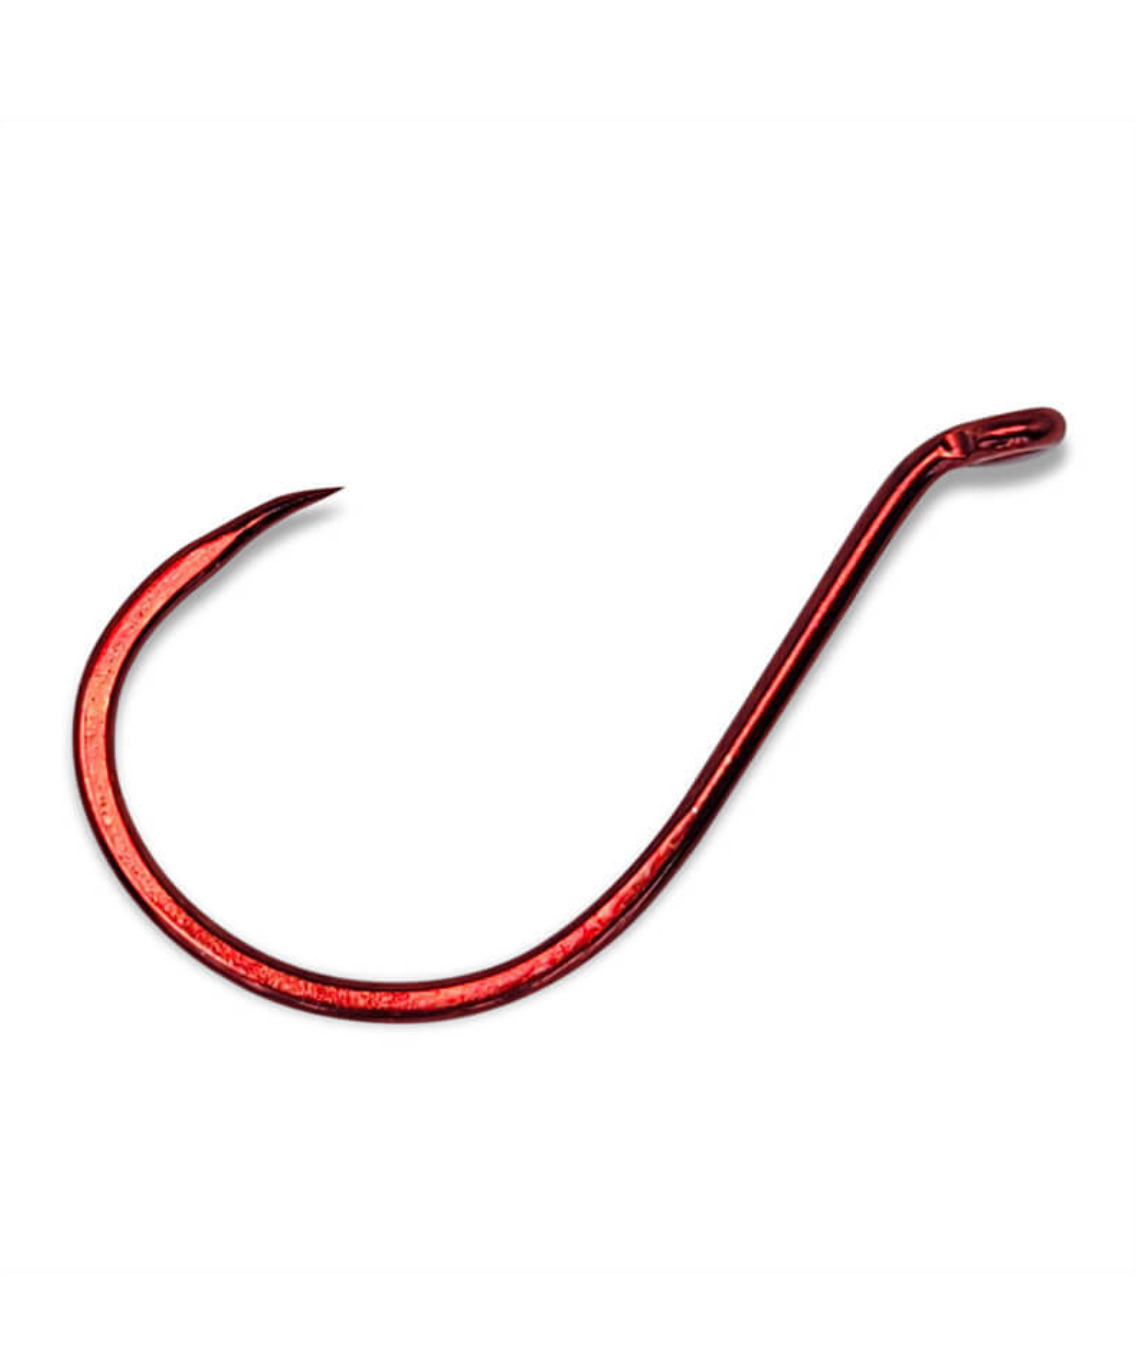 Gamakatsu Octopus Barbless Hooks - 8 Pack - Red - Size 1